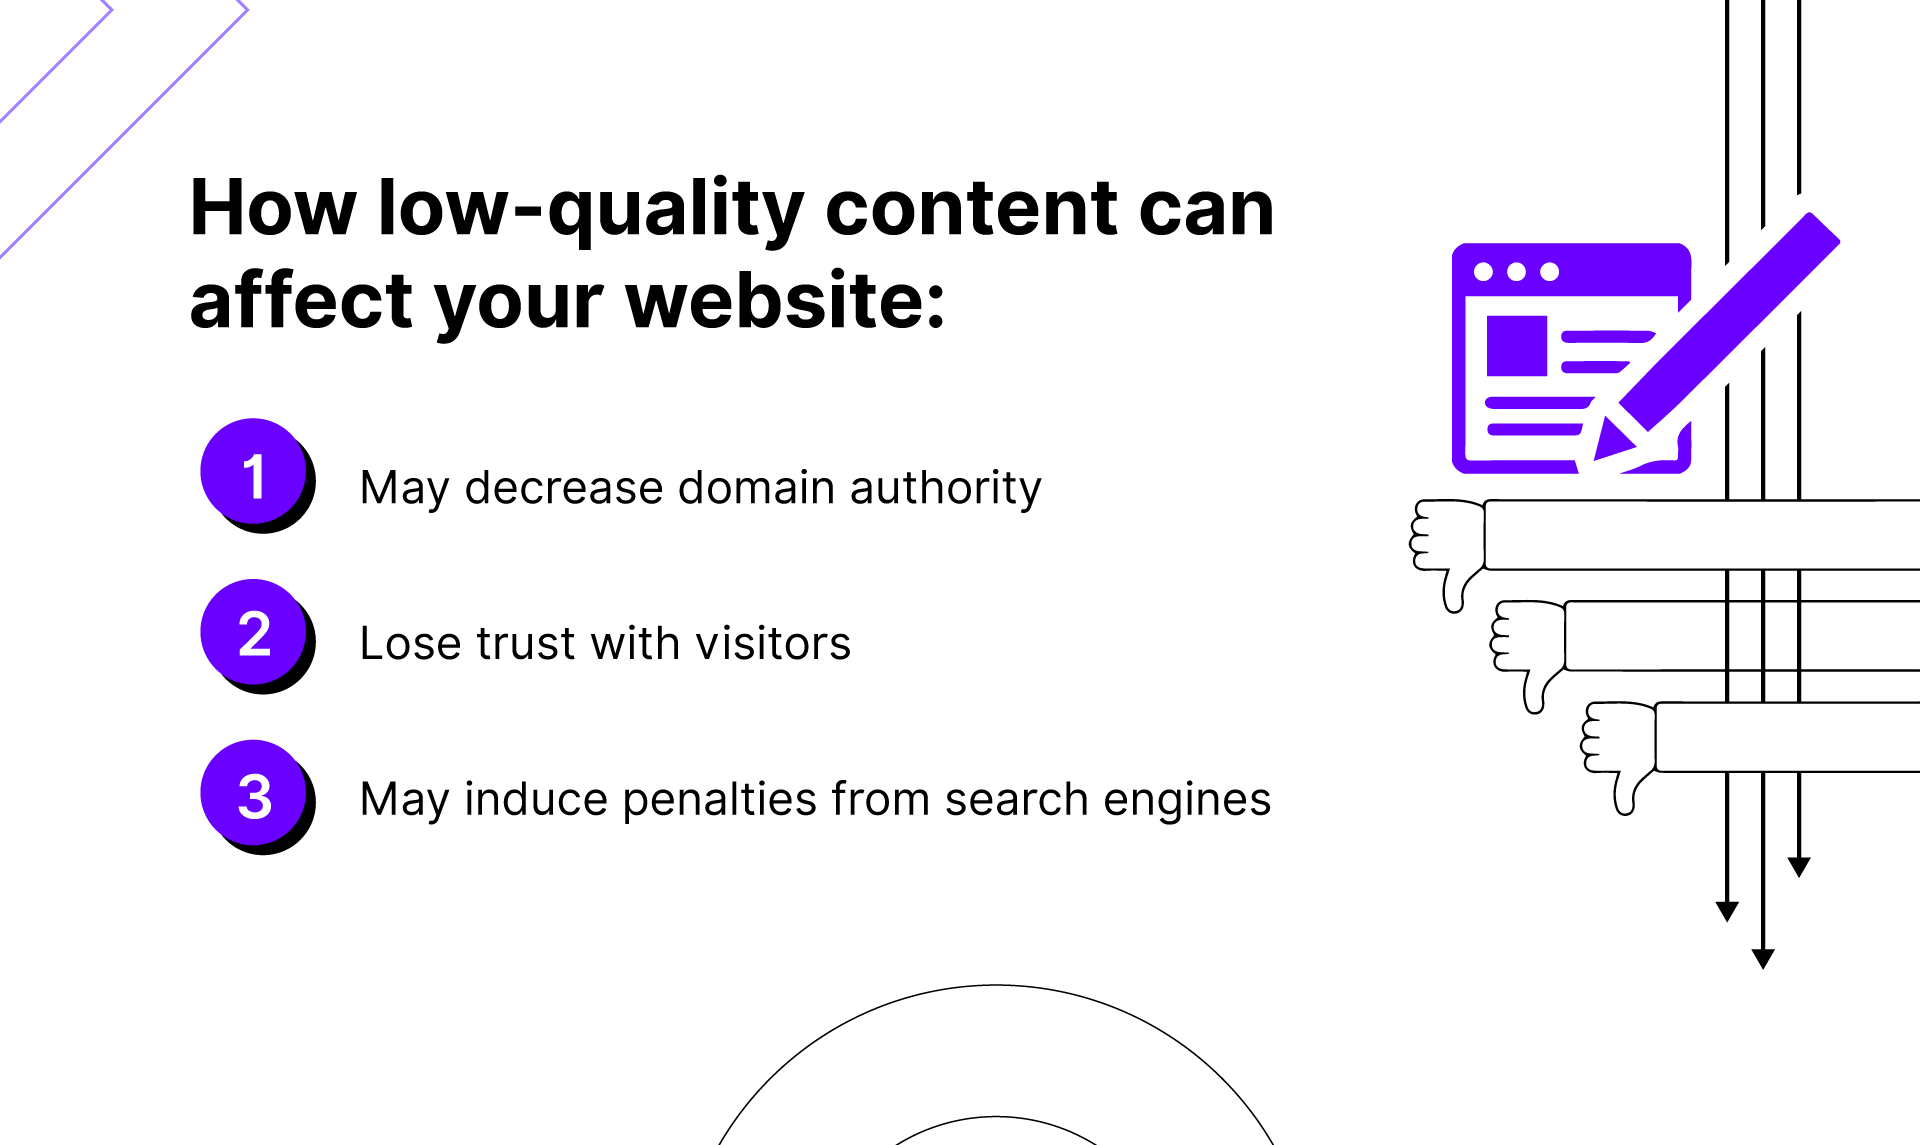 How low-quality content can affect your website. 